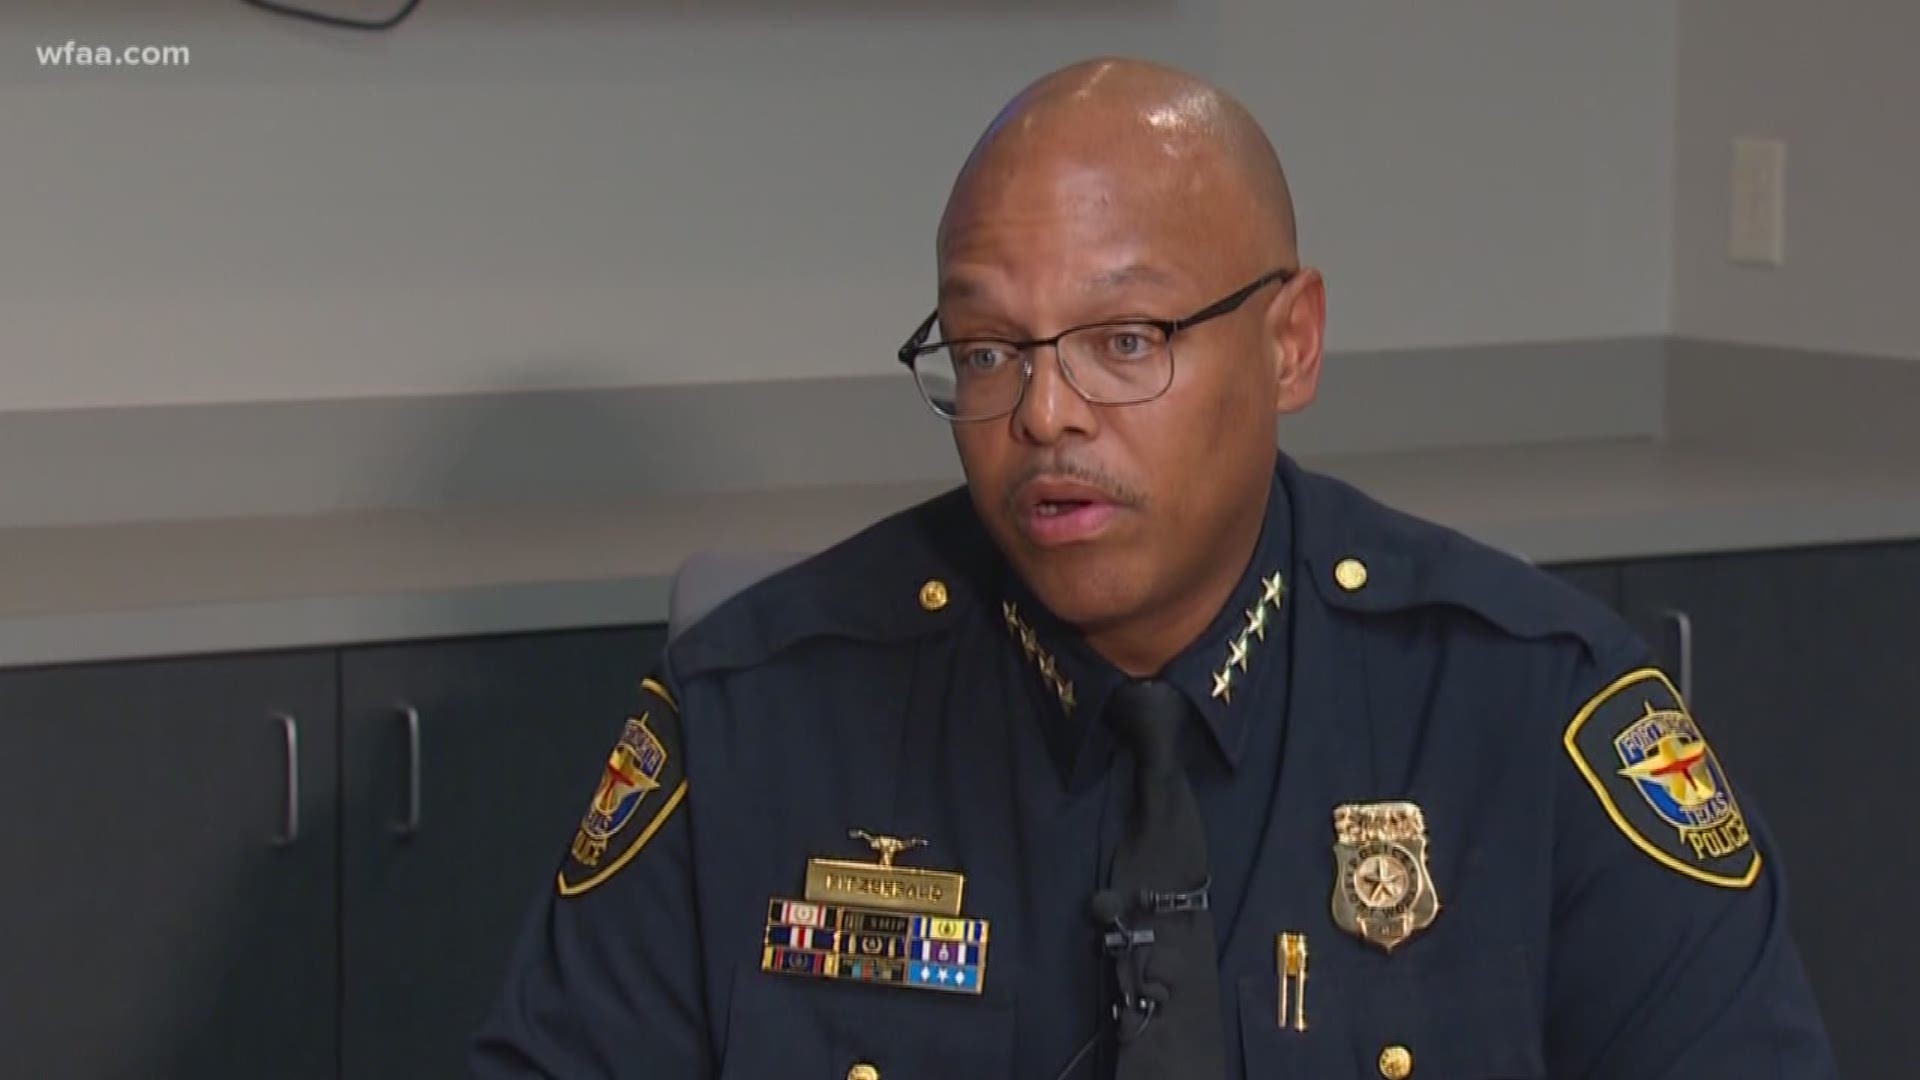 Fort Worth police chief Joel Fitzgerald fired